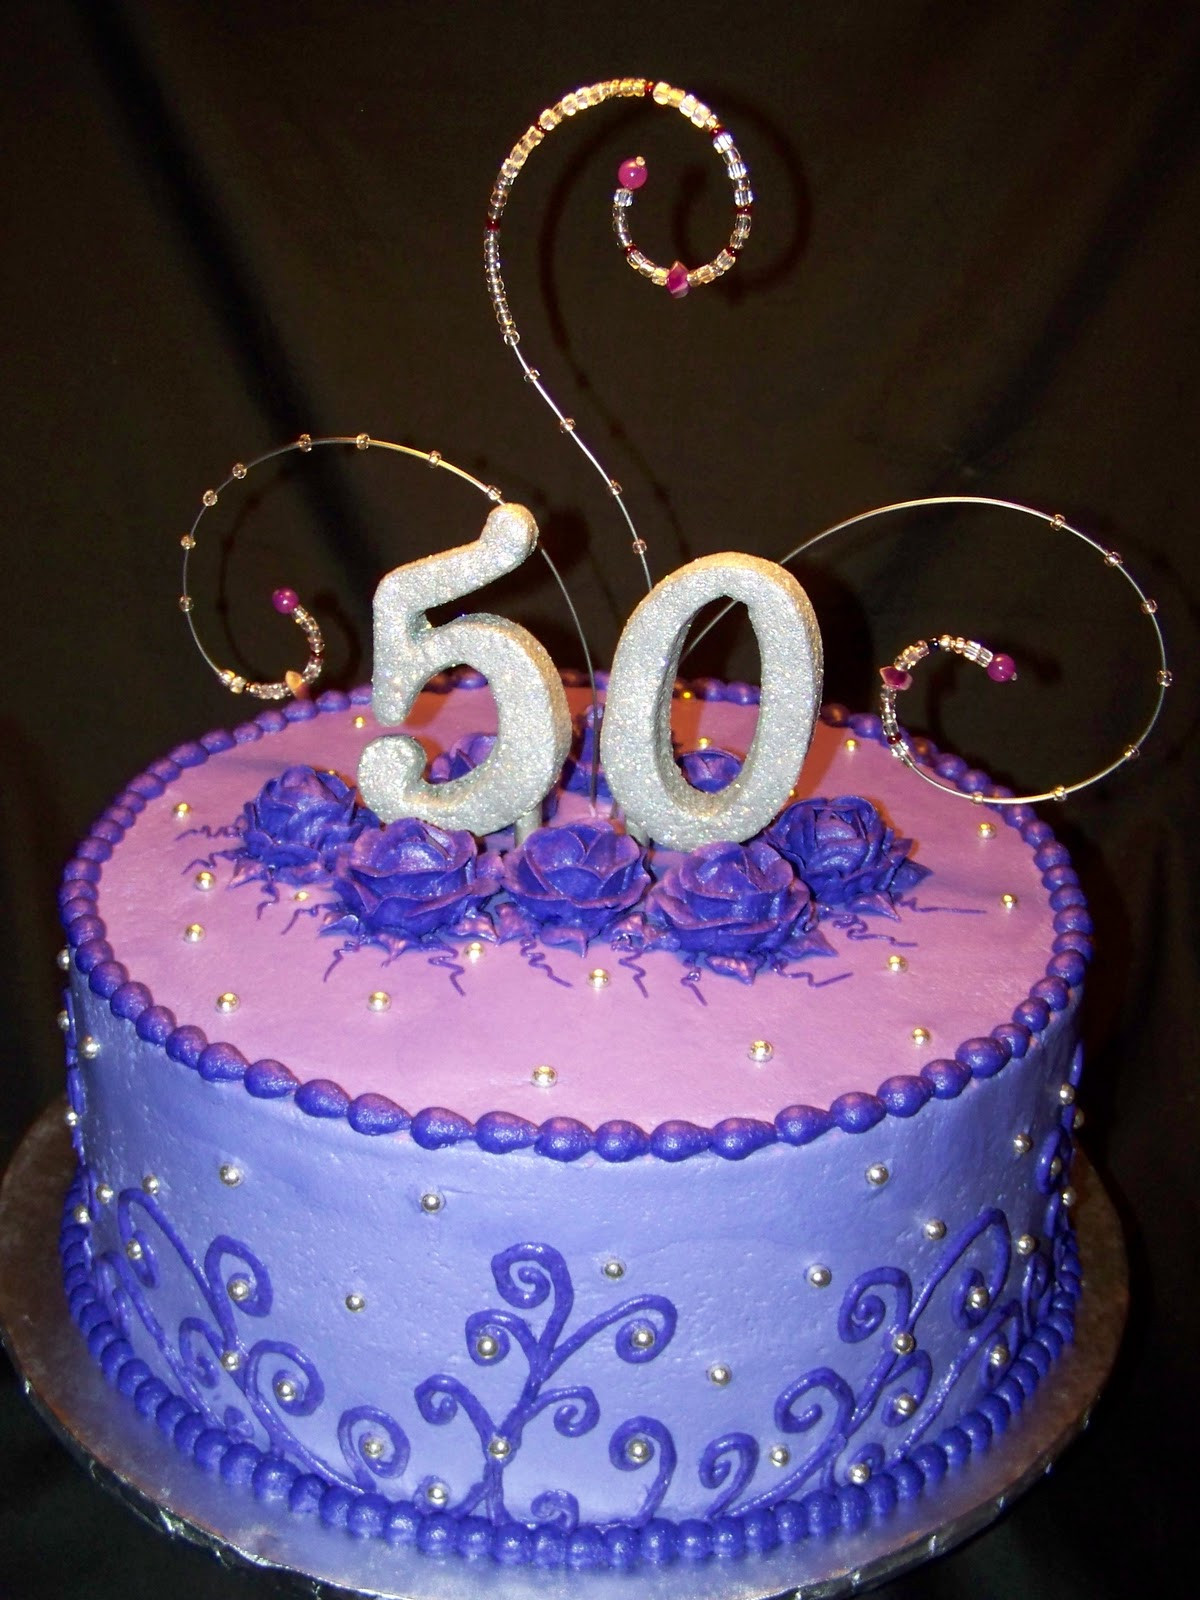 Bling Birthday Cakes
 Cakes by Kristen H Purple and Bling 50th Birthday Cake